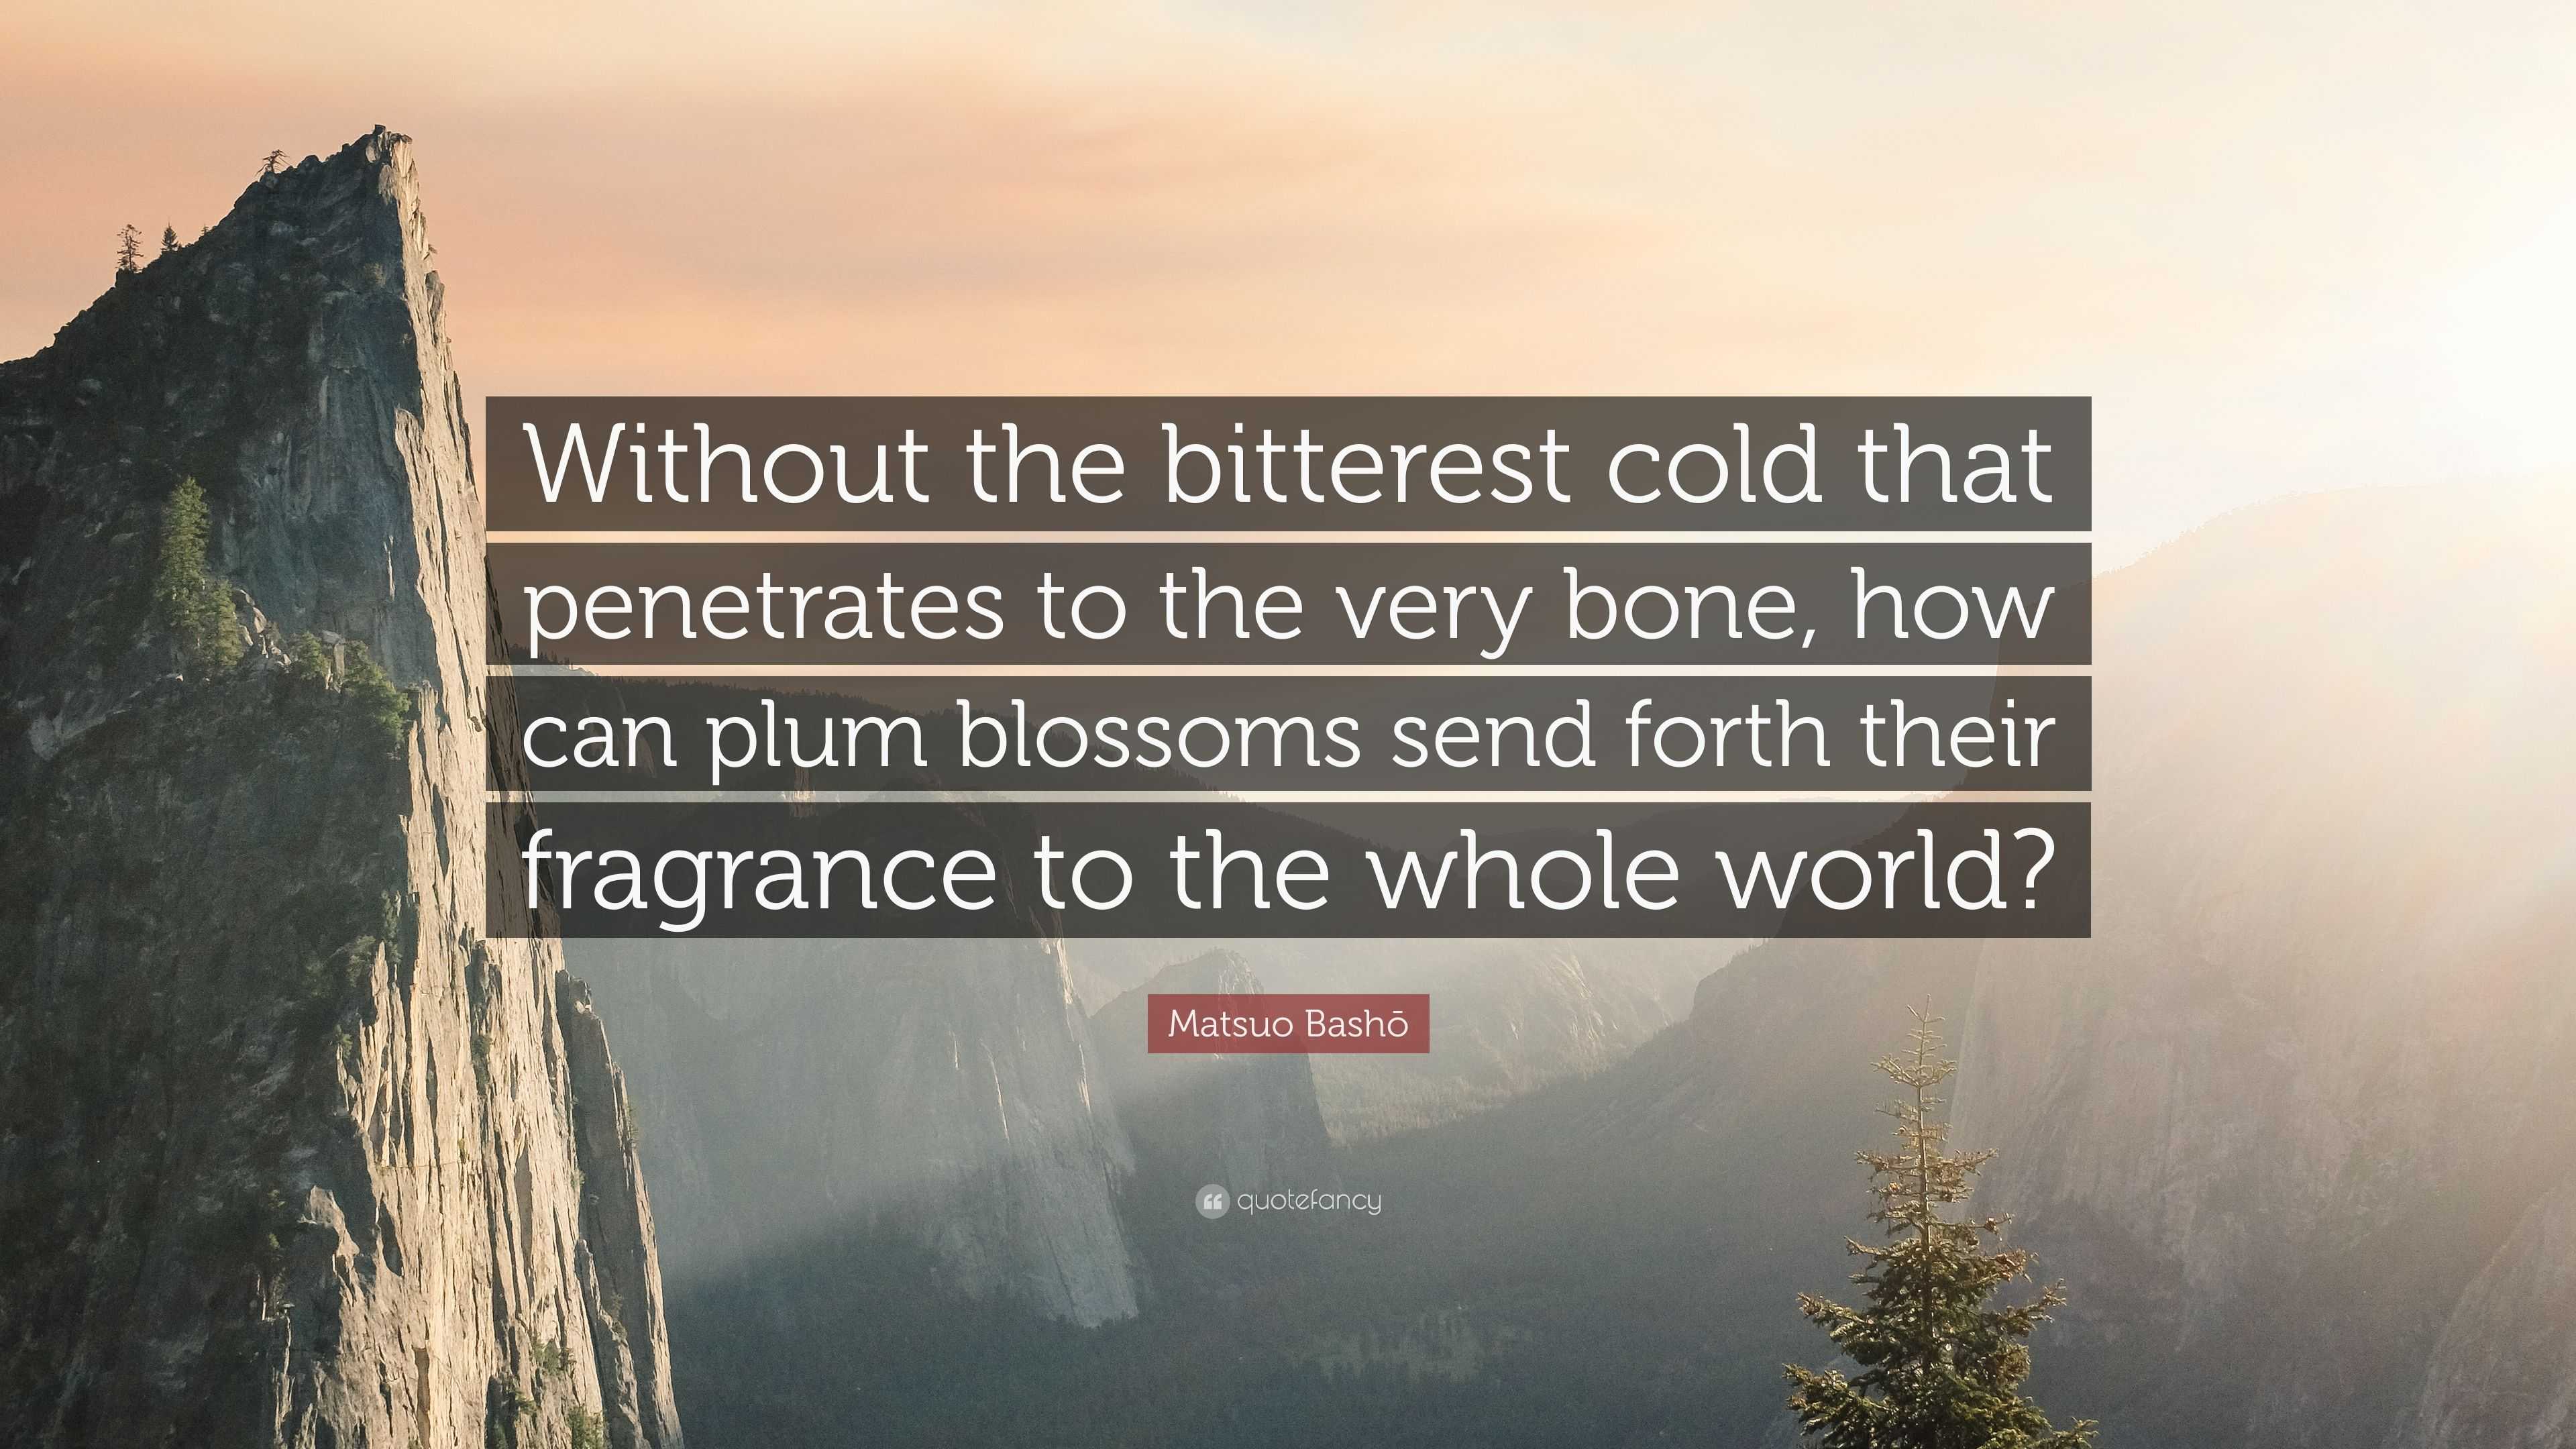 Matsuo Bashō Quote: “Without the bitterest cold that penetrates to the very  bone, how can plum blossoms send forth their fragrance to the who”